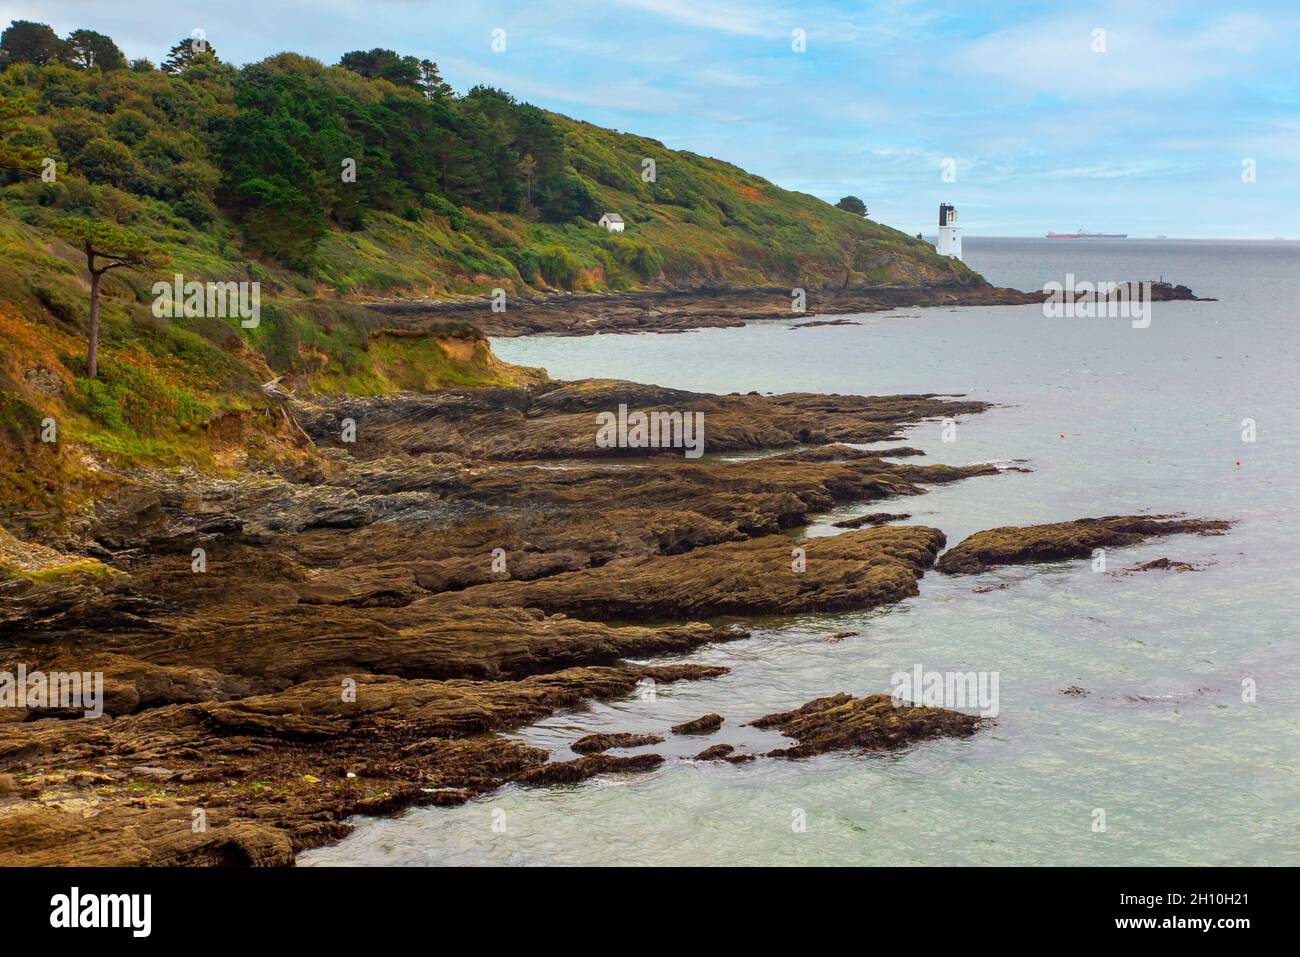 St Anthony Head on the Falmouth Eastuary on the Roseland Peninsula part of the South West Coast Path in south Cornwall England UK Stock Photo